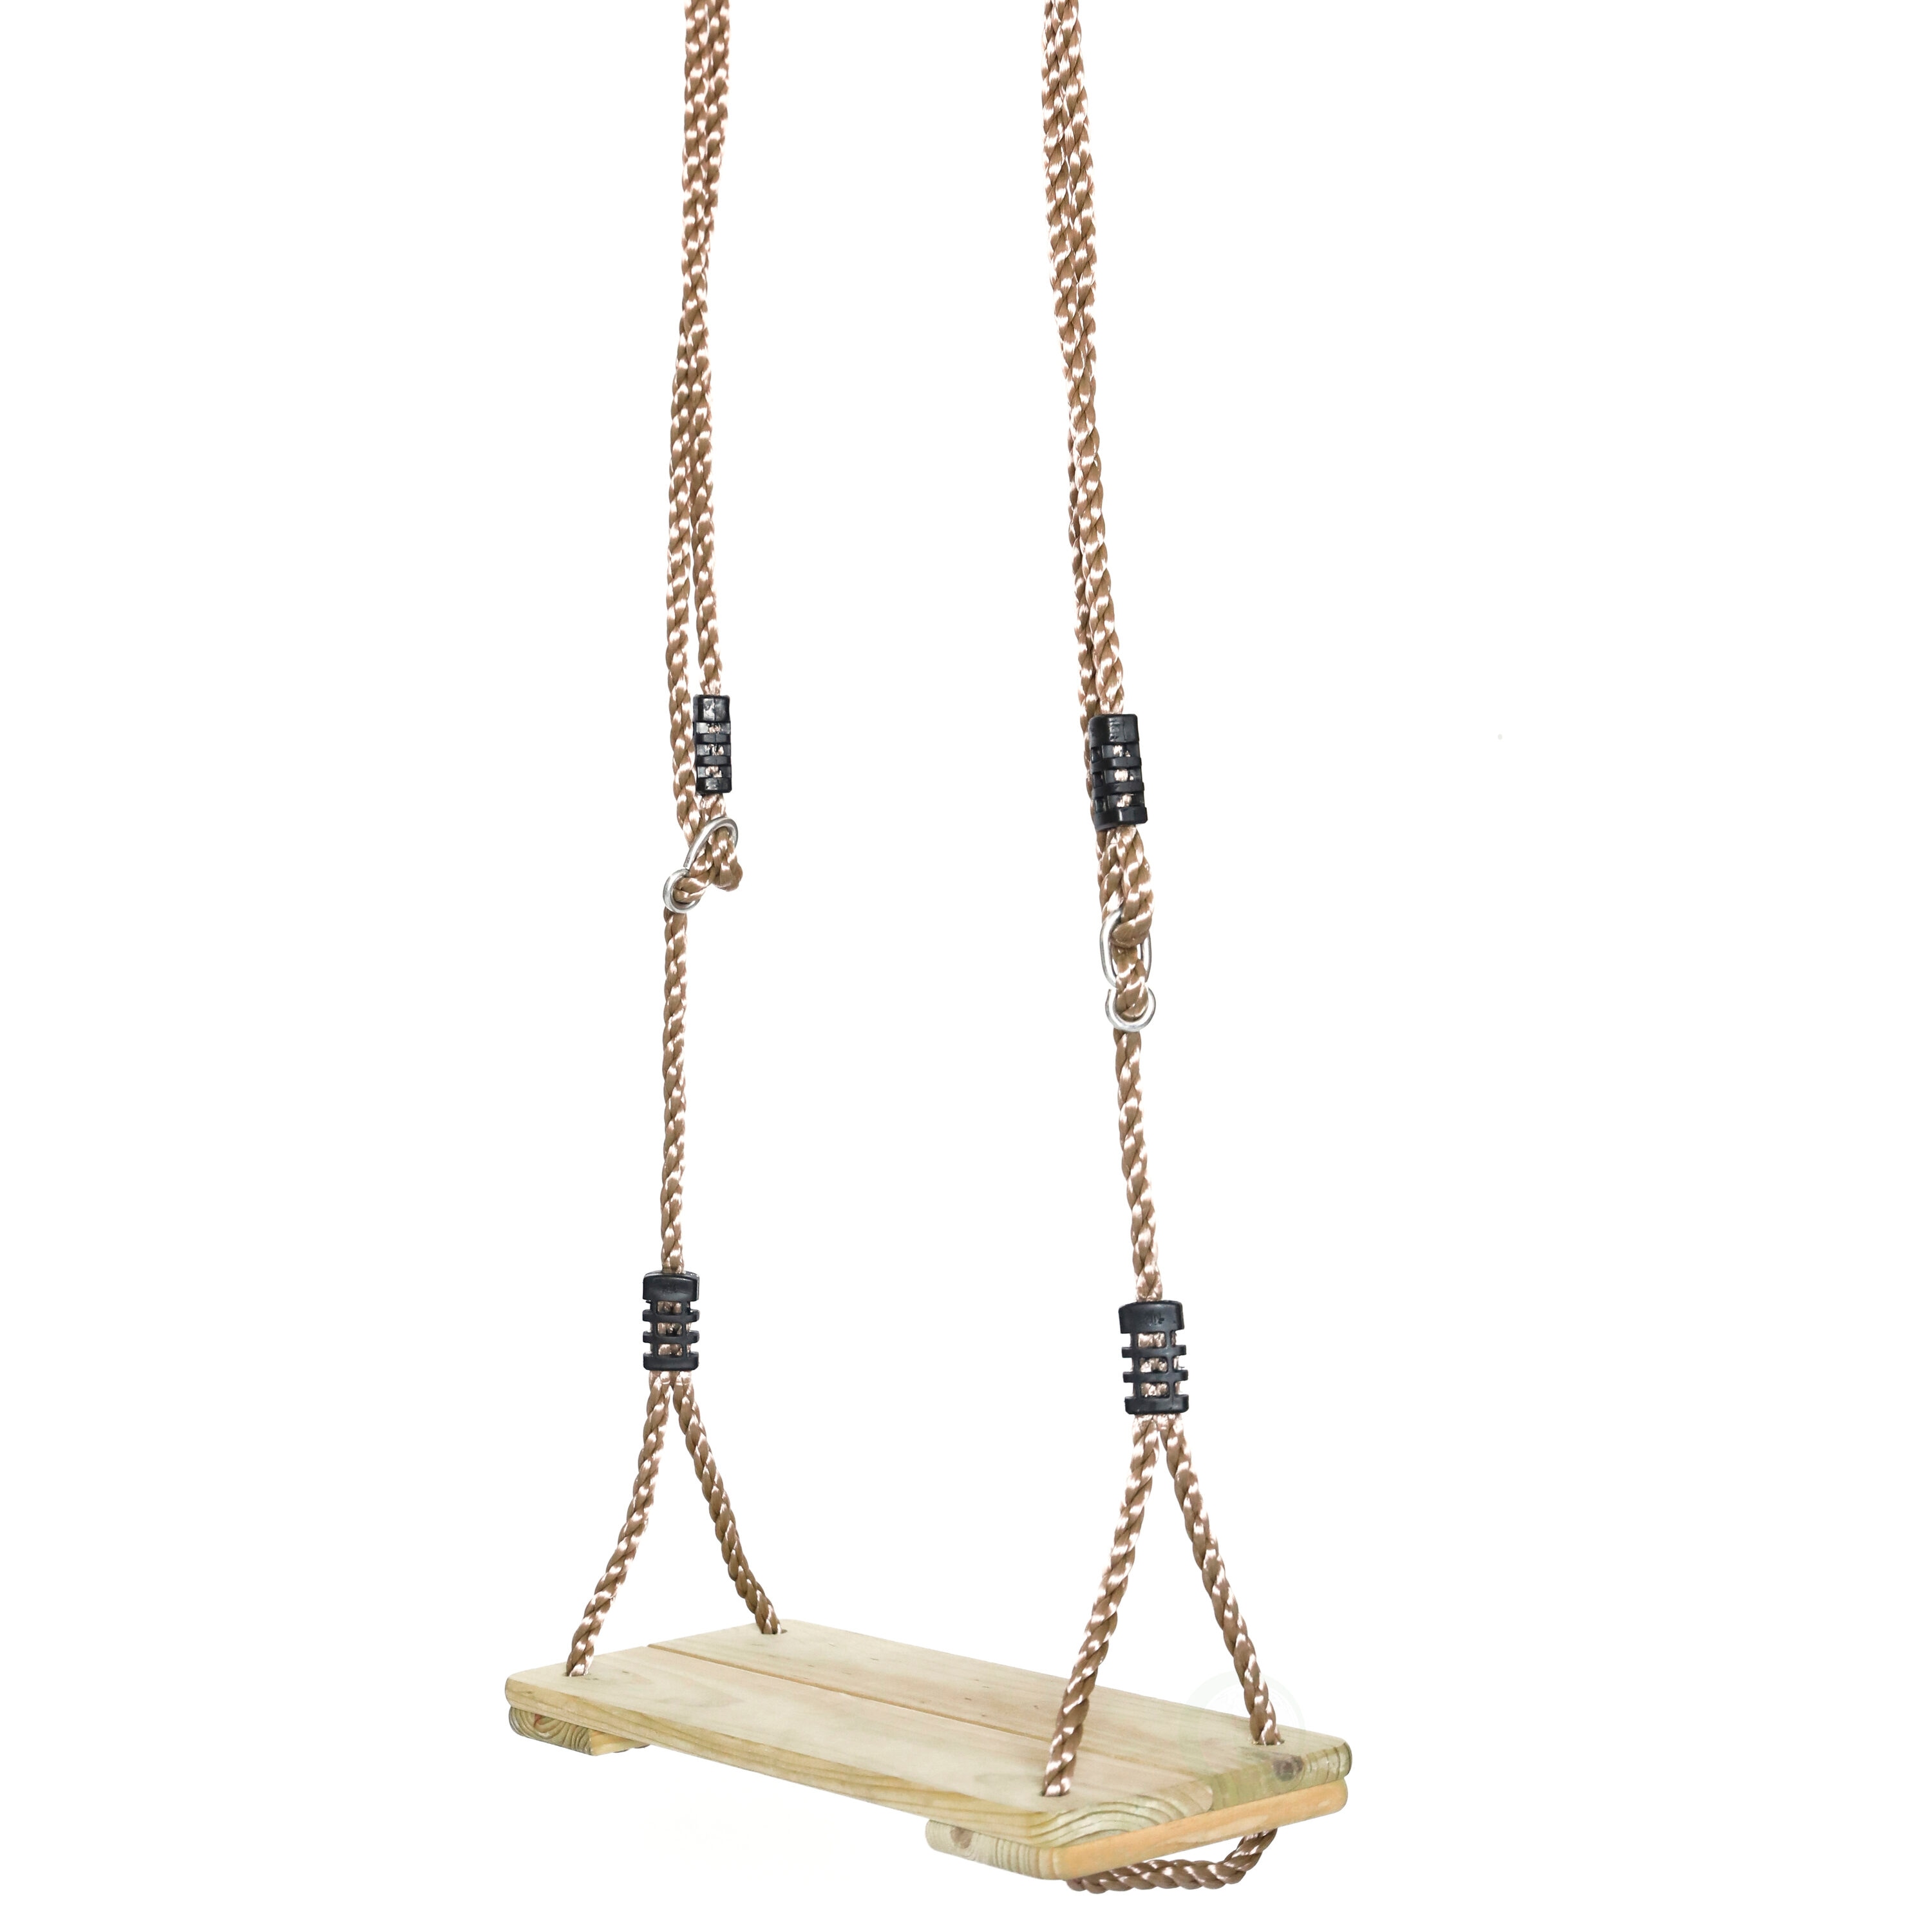 Playberg Tree Swing with Hanging Rope Wood Brown Residential Rope